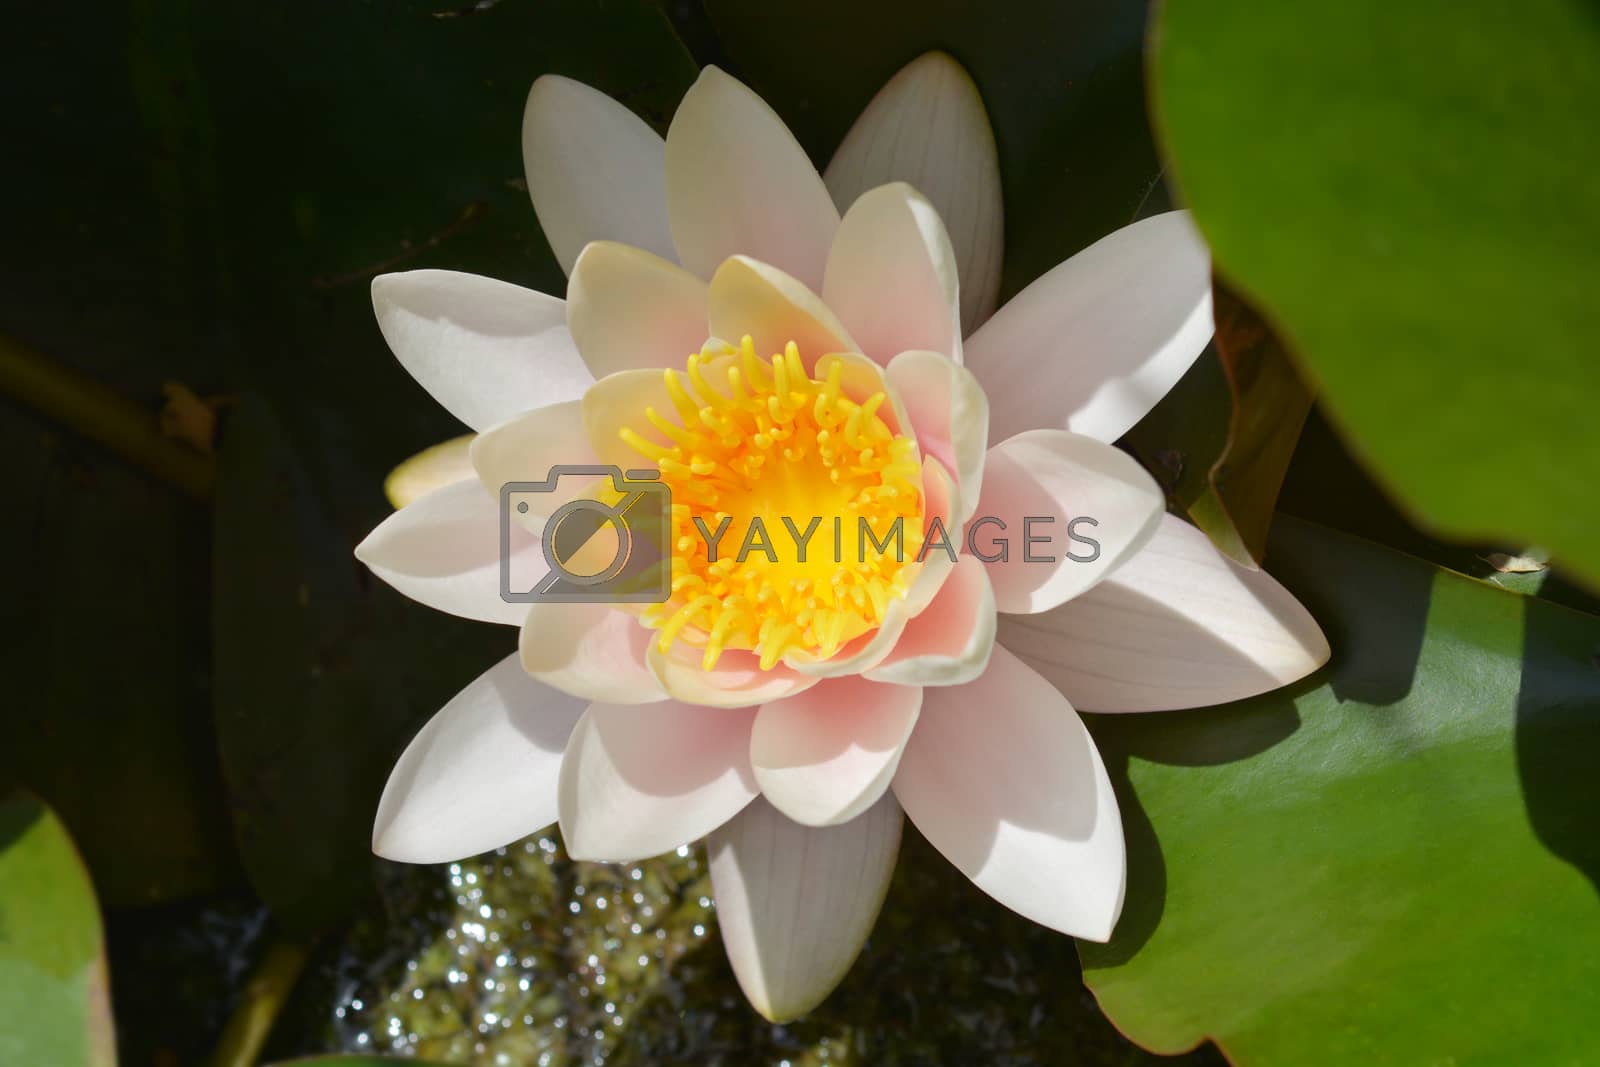 Royalty free image of White water lily by nahhan